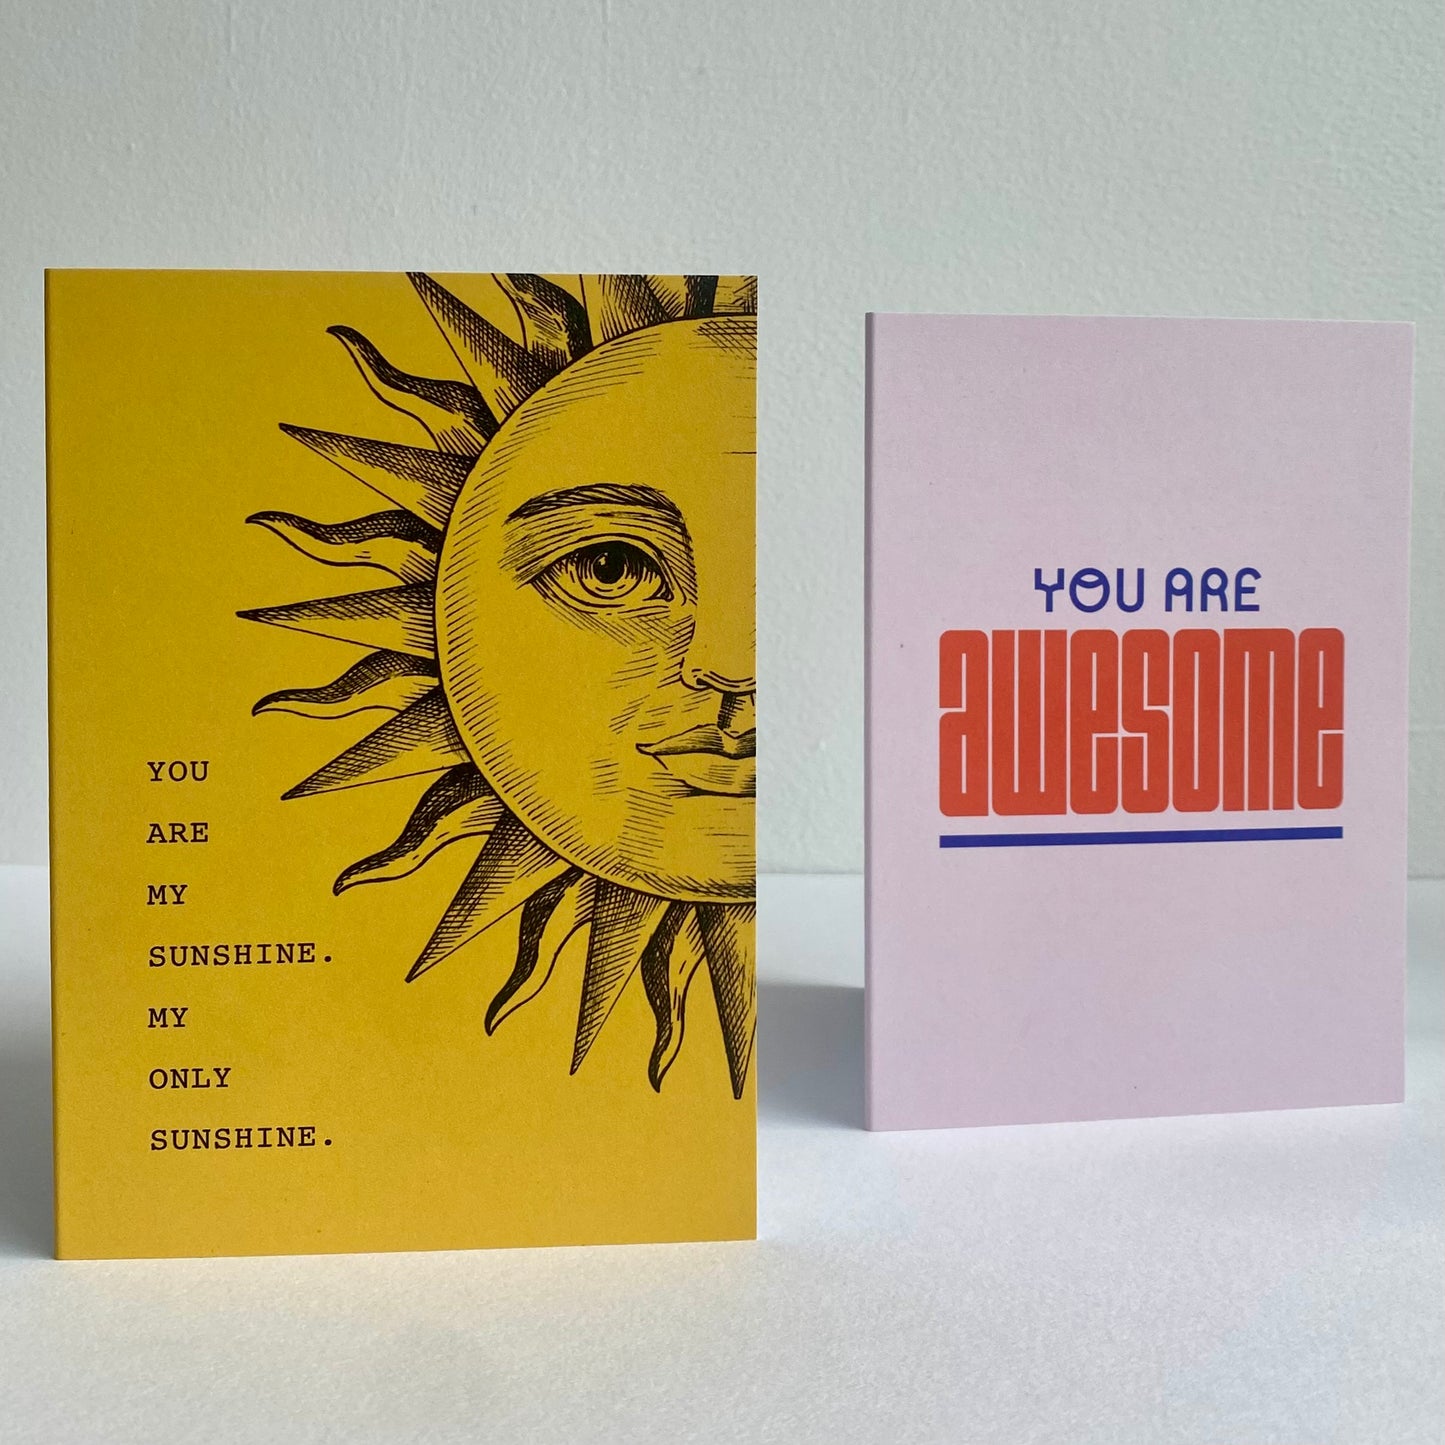 Hustle: You are Awesome